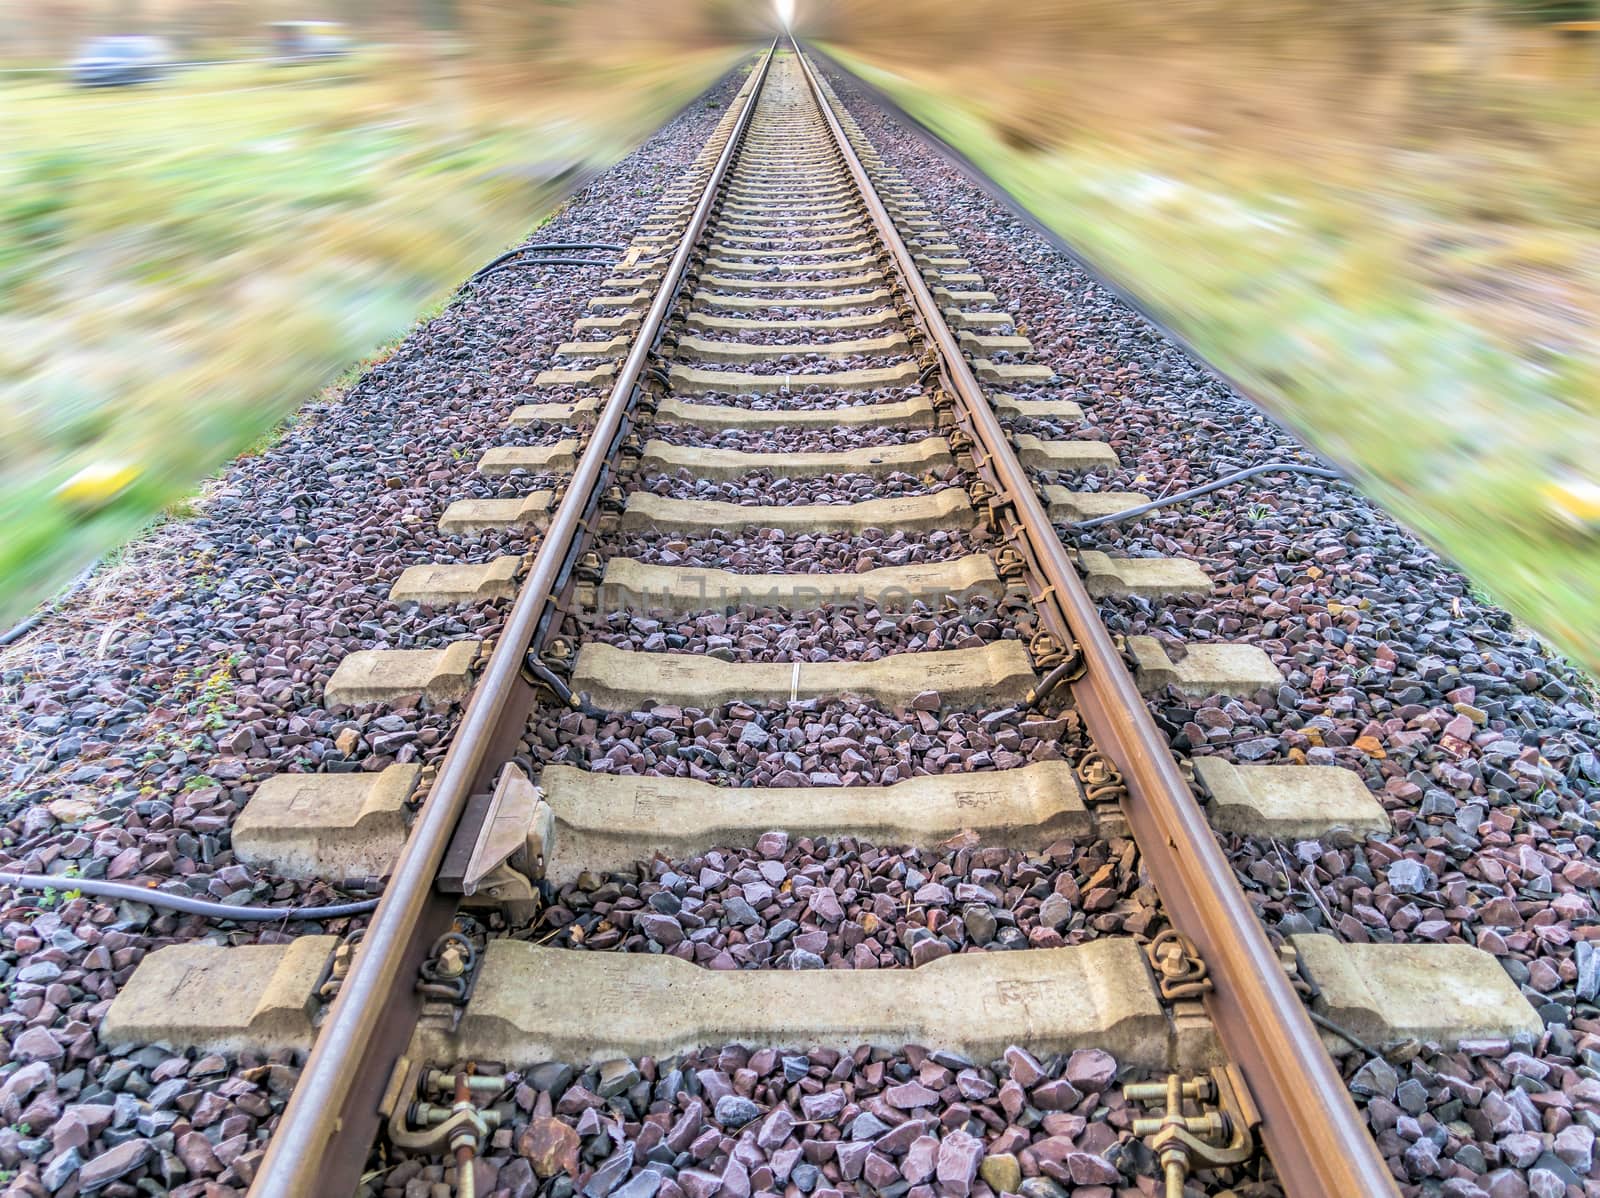 Abstract post-processed photograph of railroad tracks with blurred landscape, central perspective, blurry